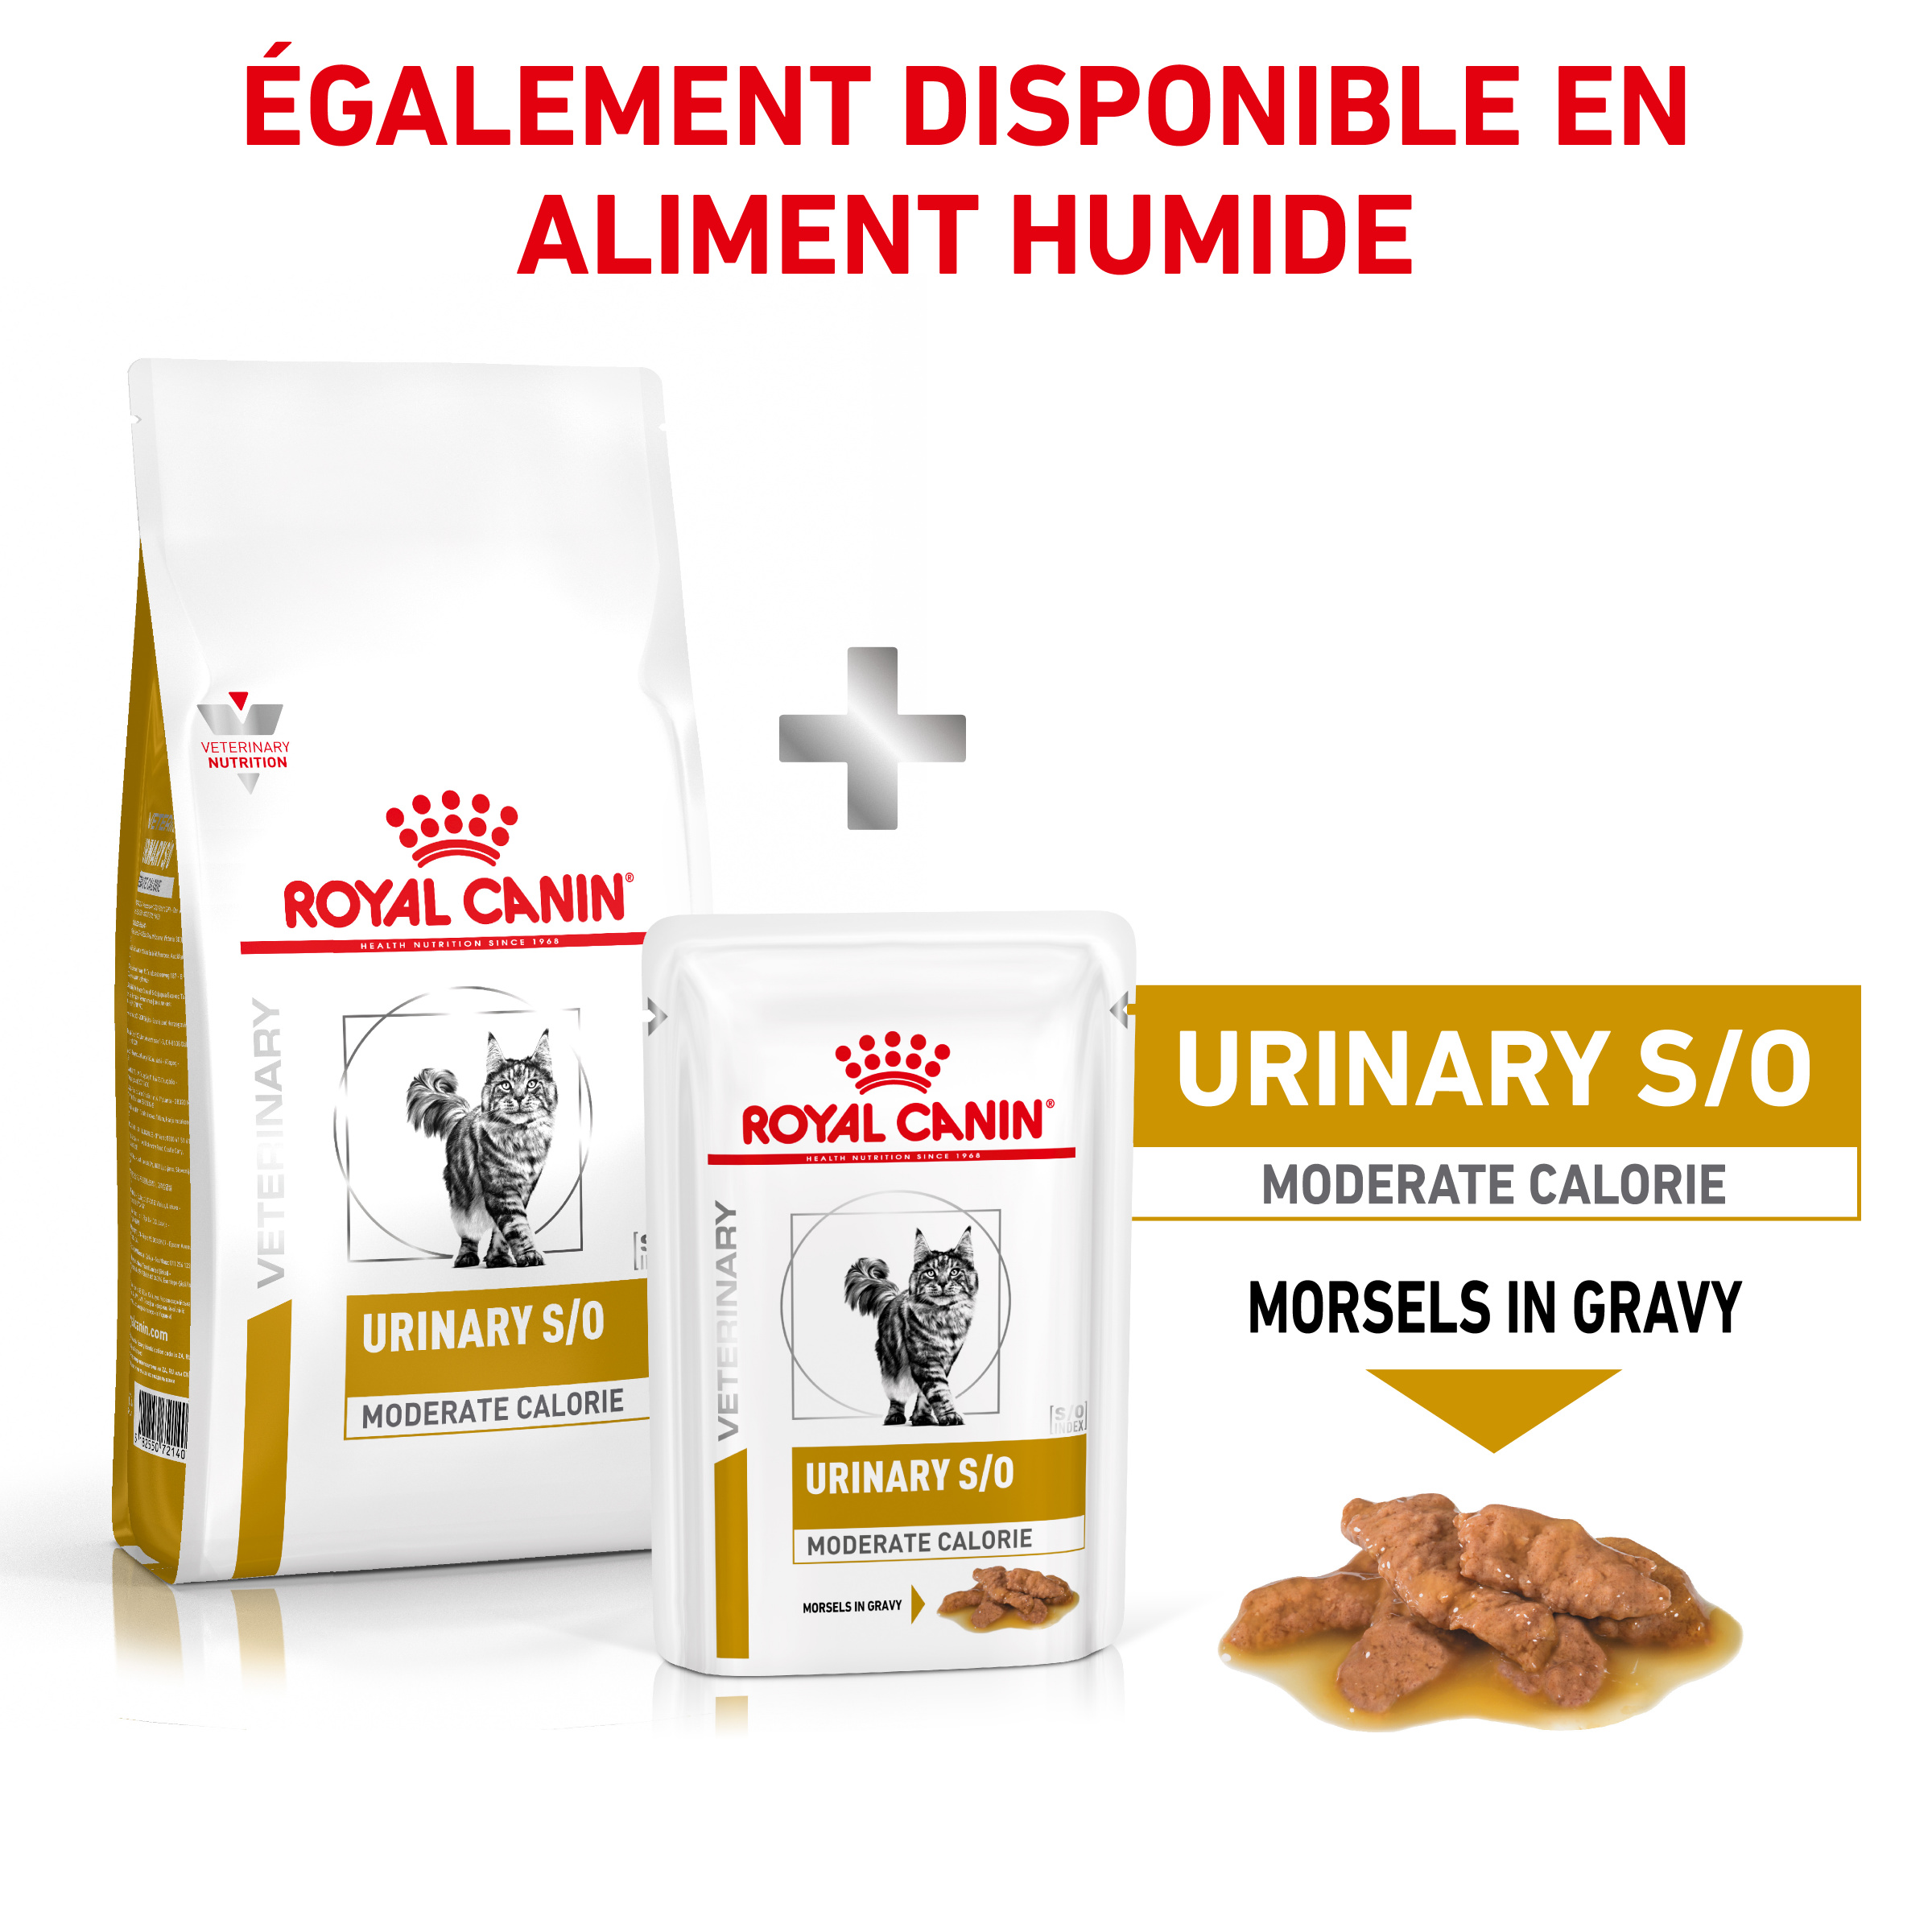 Urinary S/O Moderate Calorie - Royal canin urinary moderate calorie chat